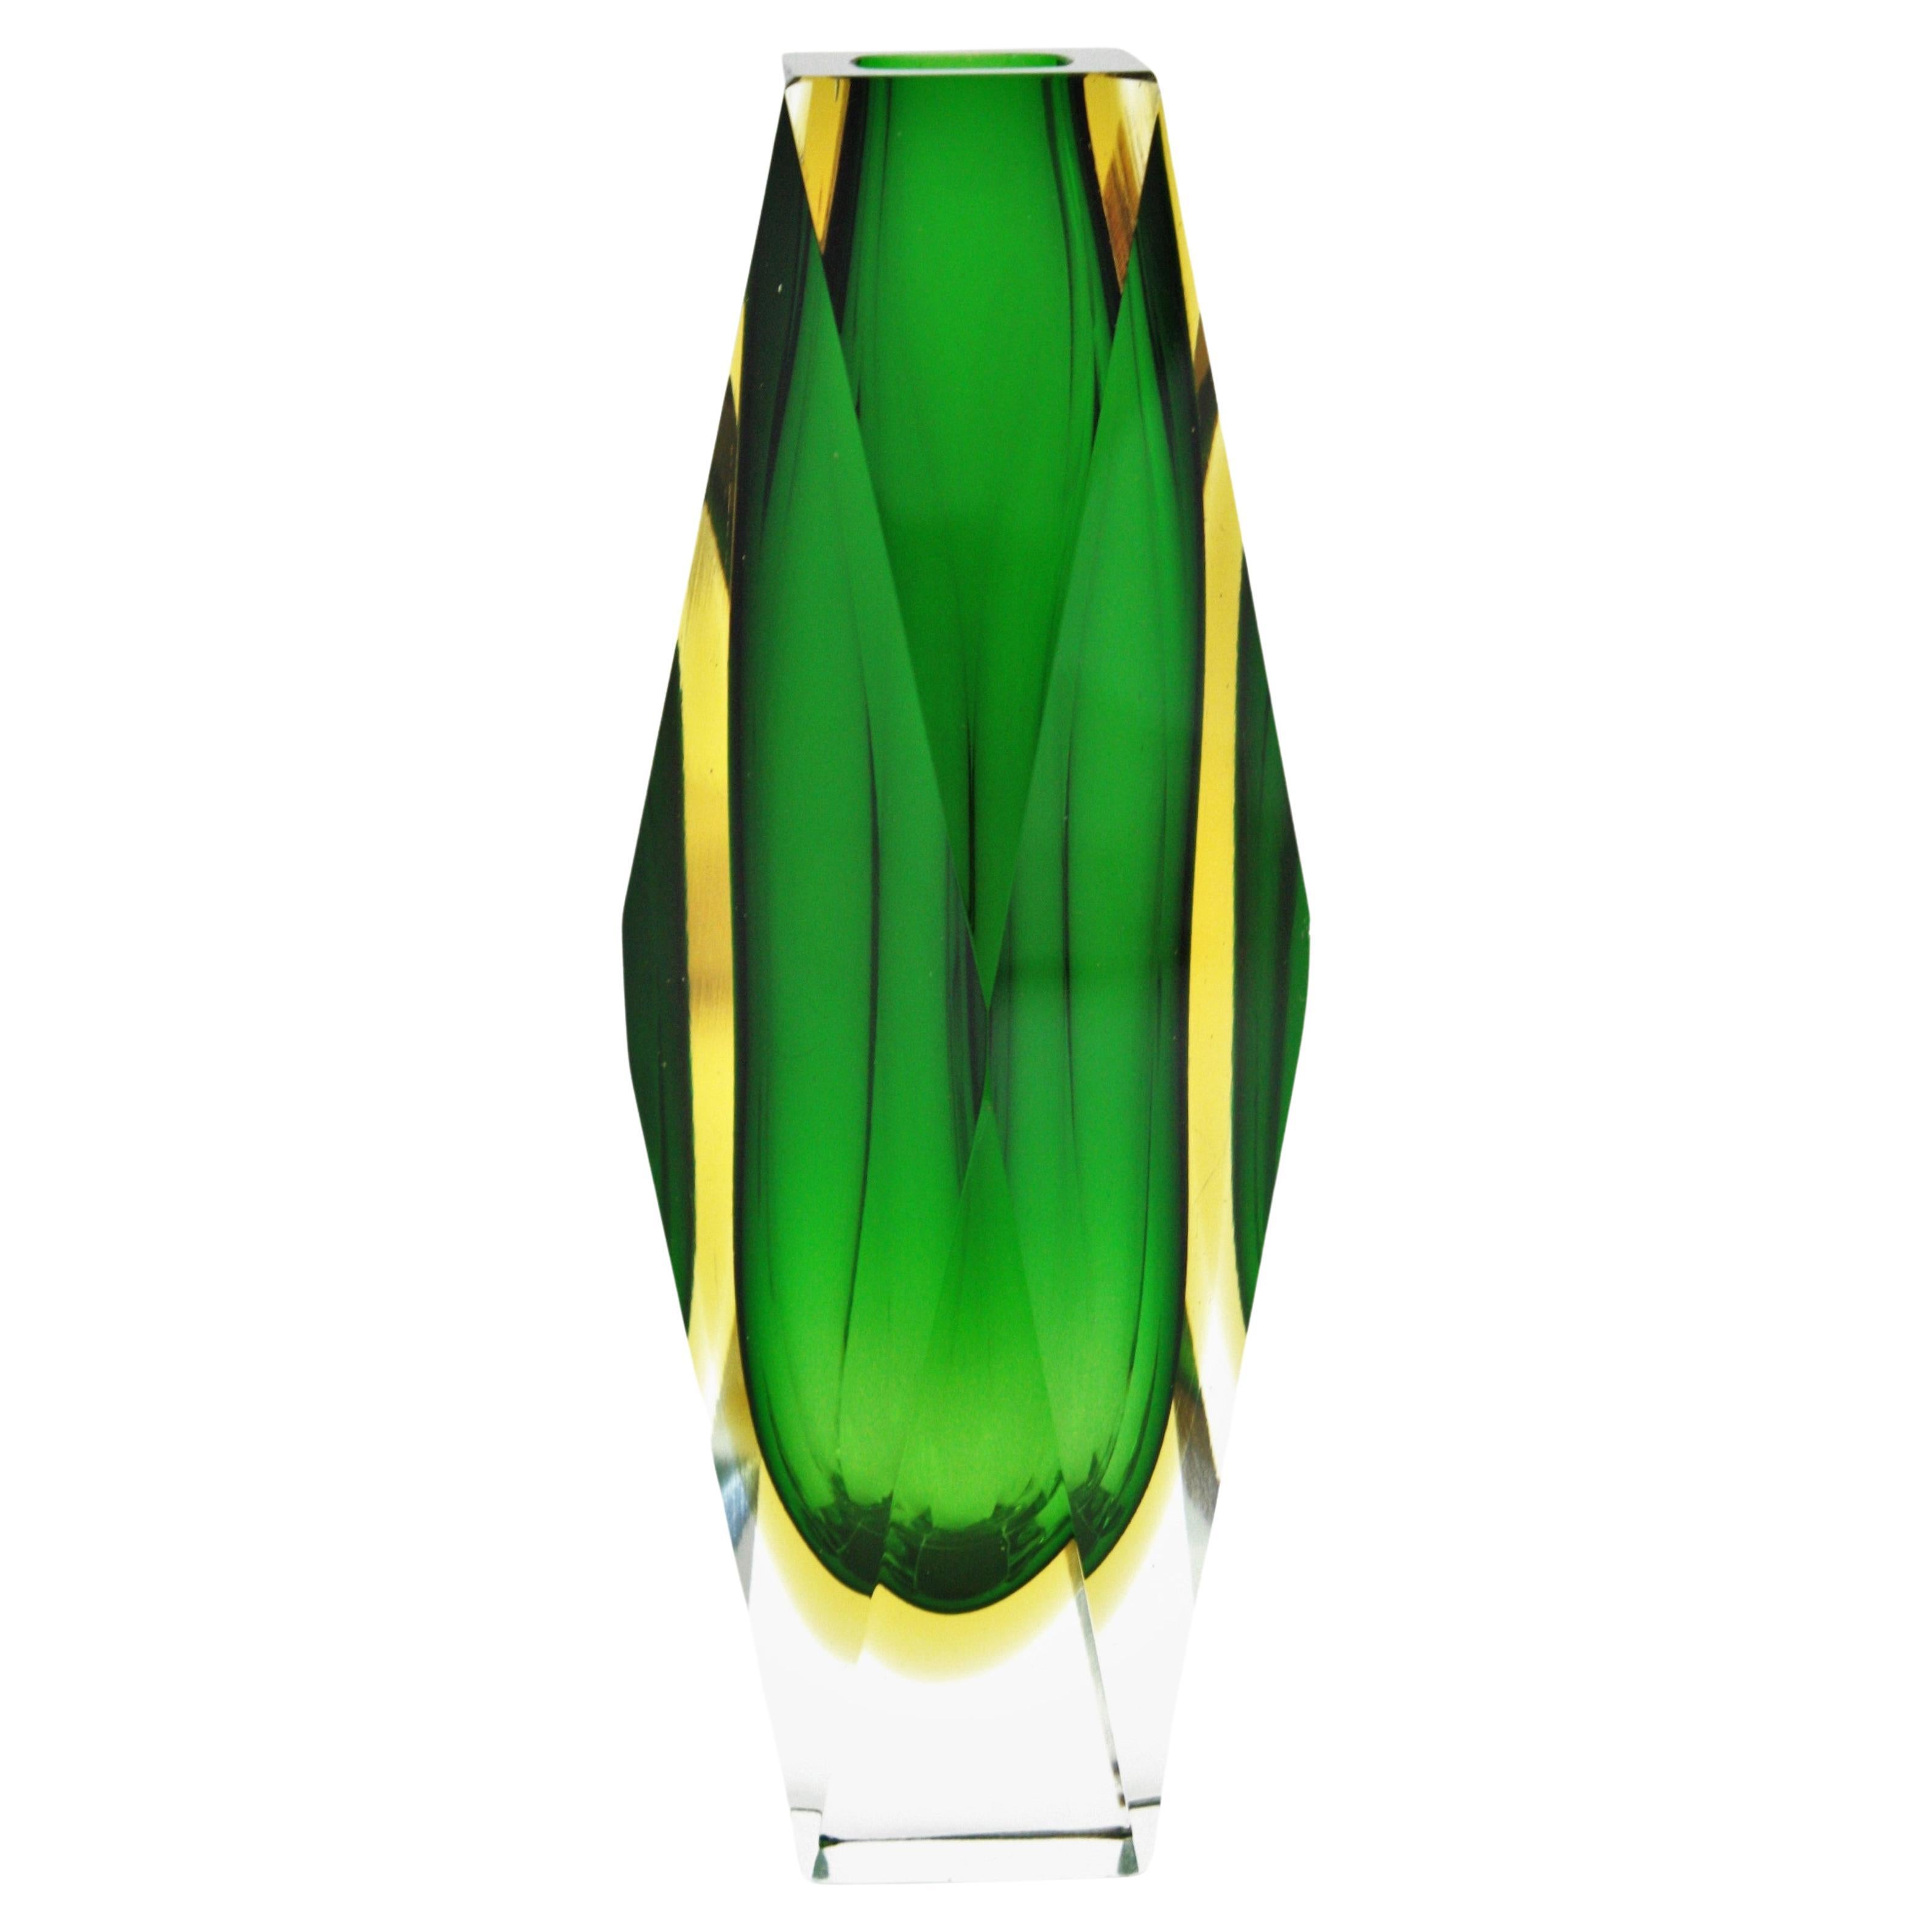 Giant Mandruzzato Murano Sommerso Green Yellow Faceted Art Glass Vase For Sale